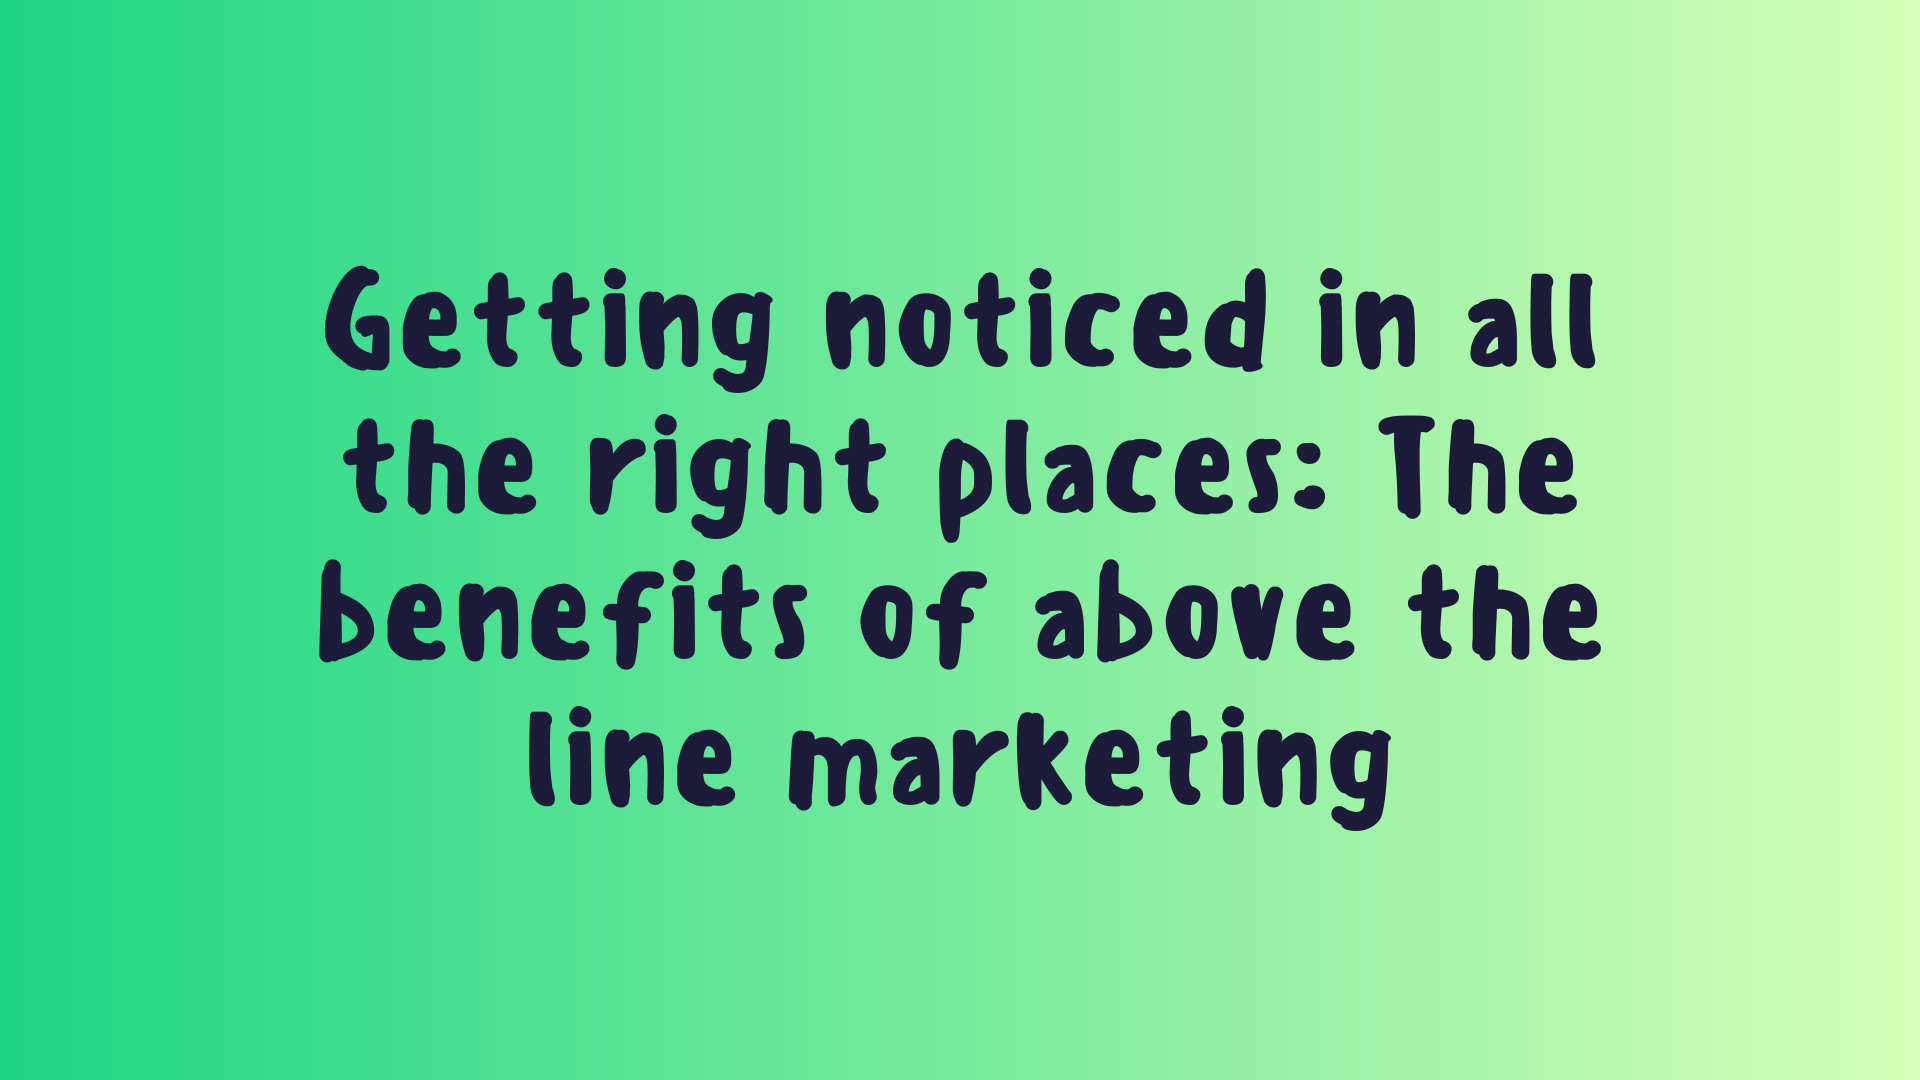 The benefits of above the line marketing